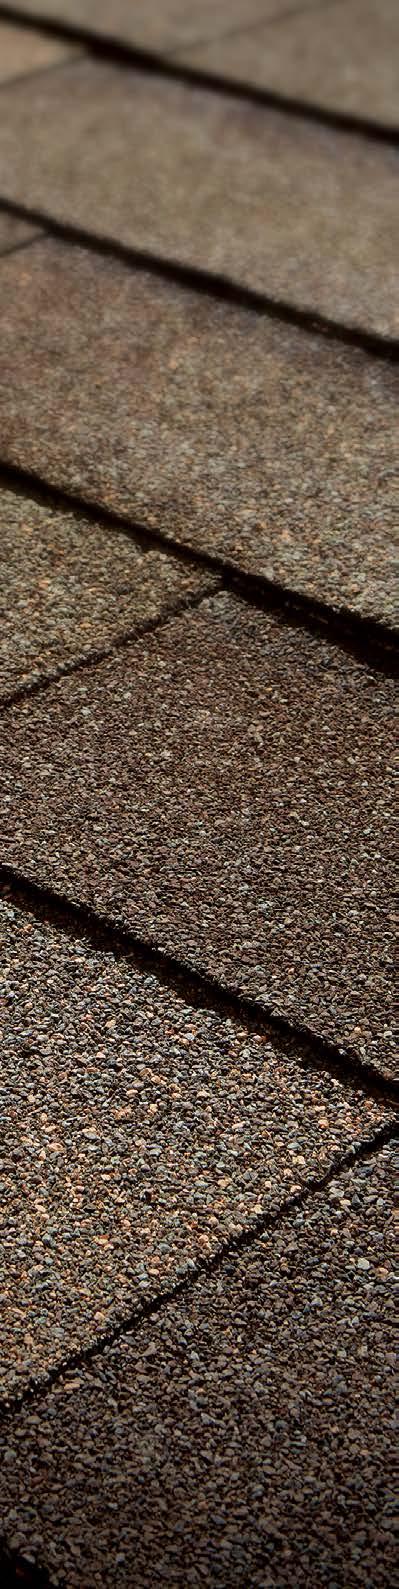 Heritage Woodgate shingles come with a 30-year Limited Warranty and Arbitration Agreement and 15-year Full Start Period.